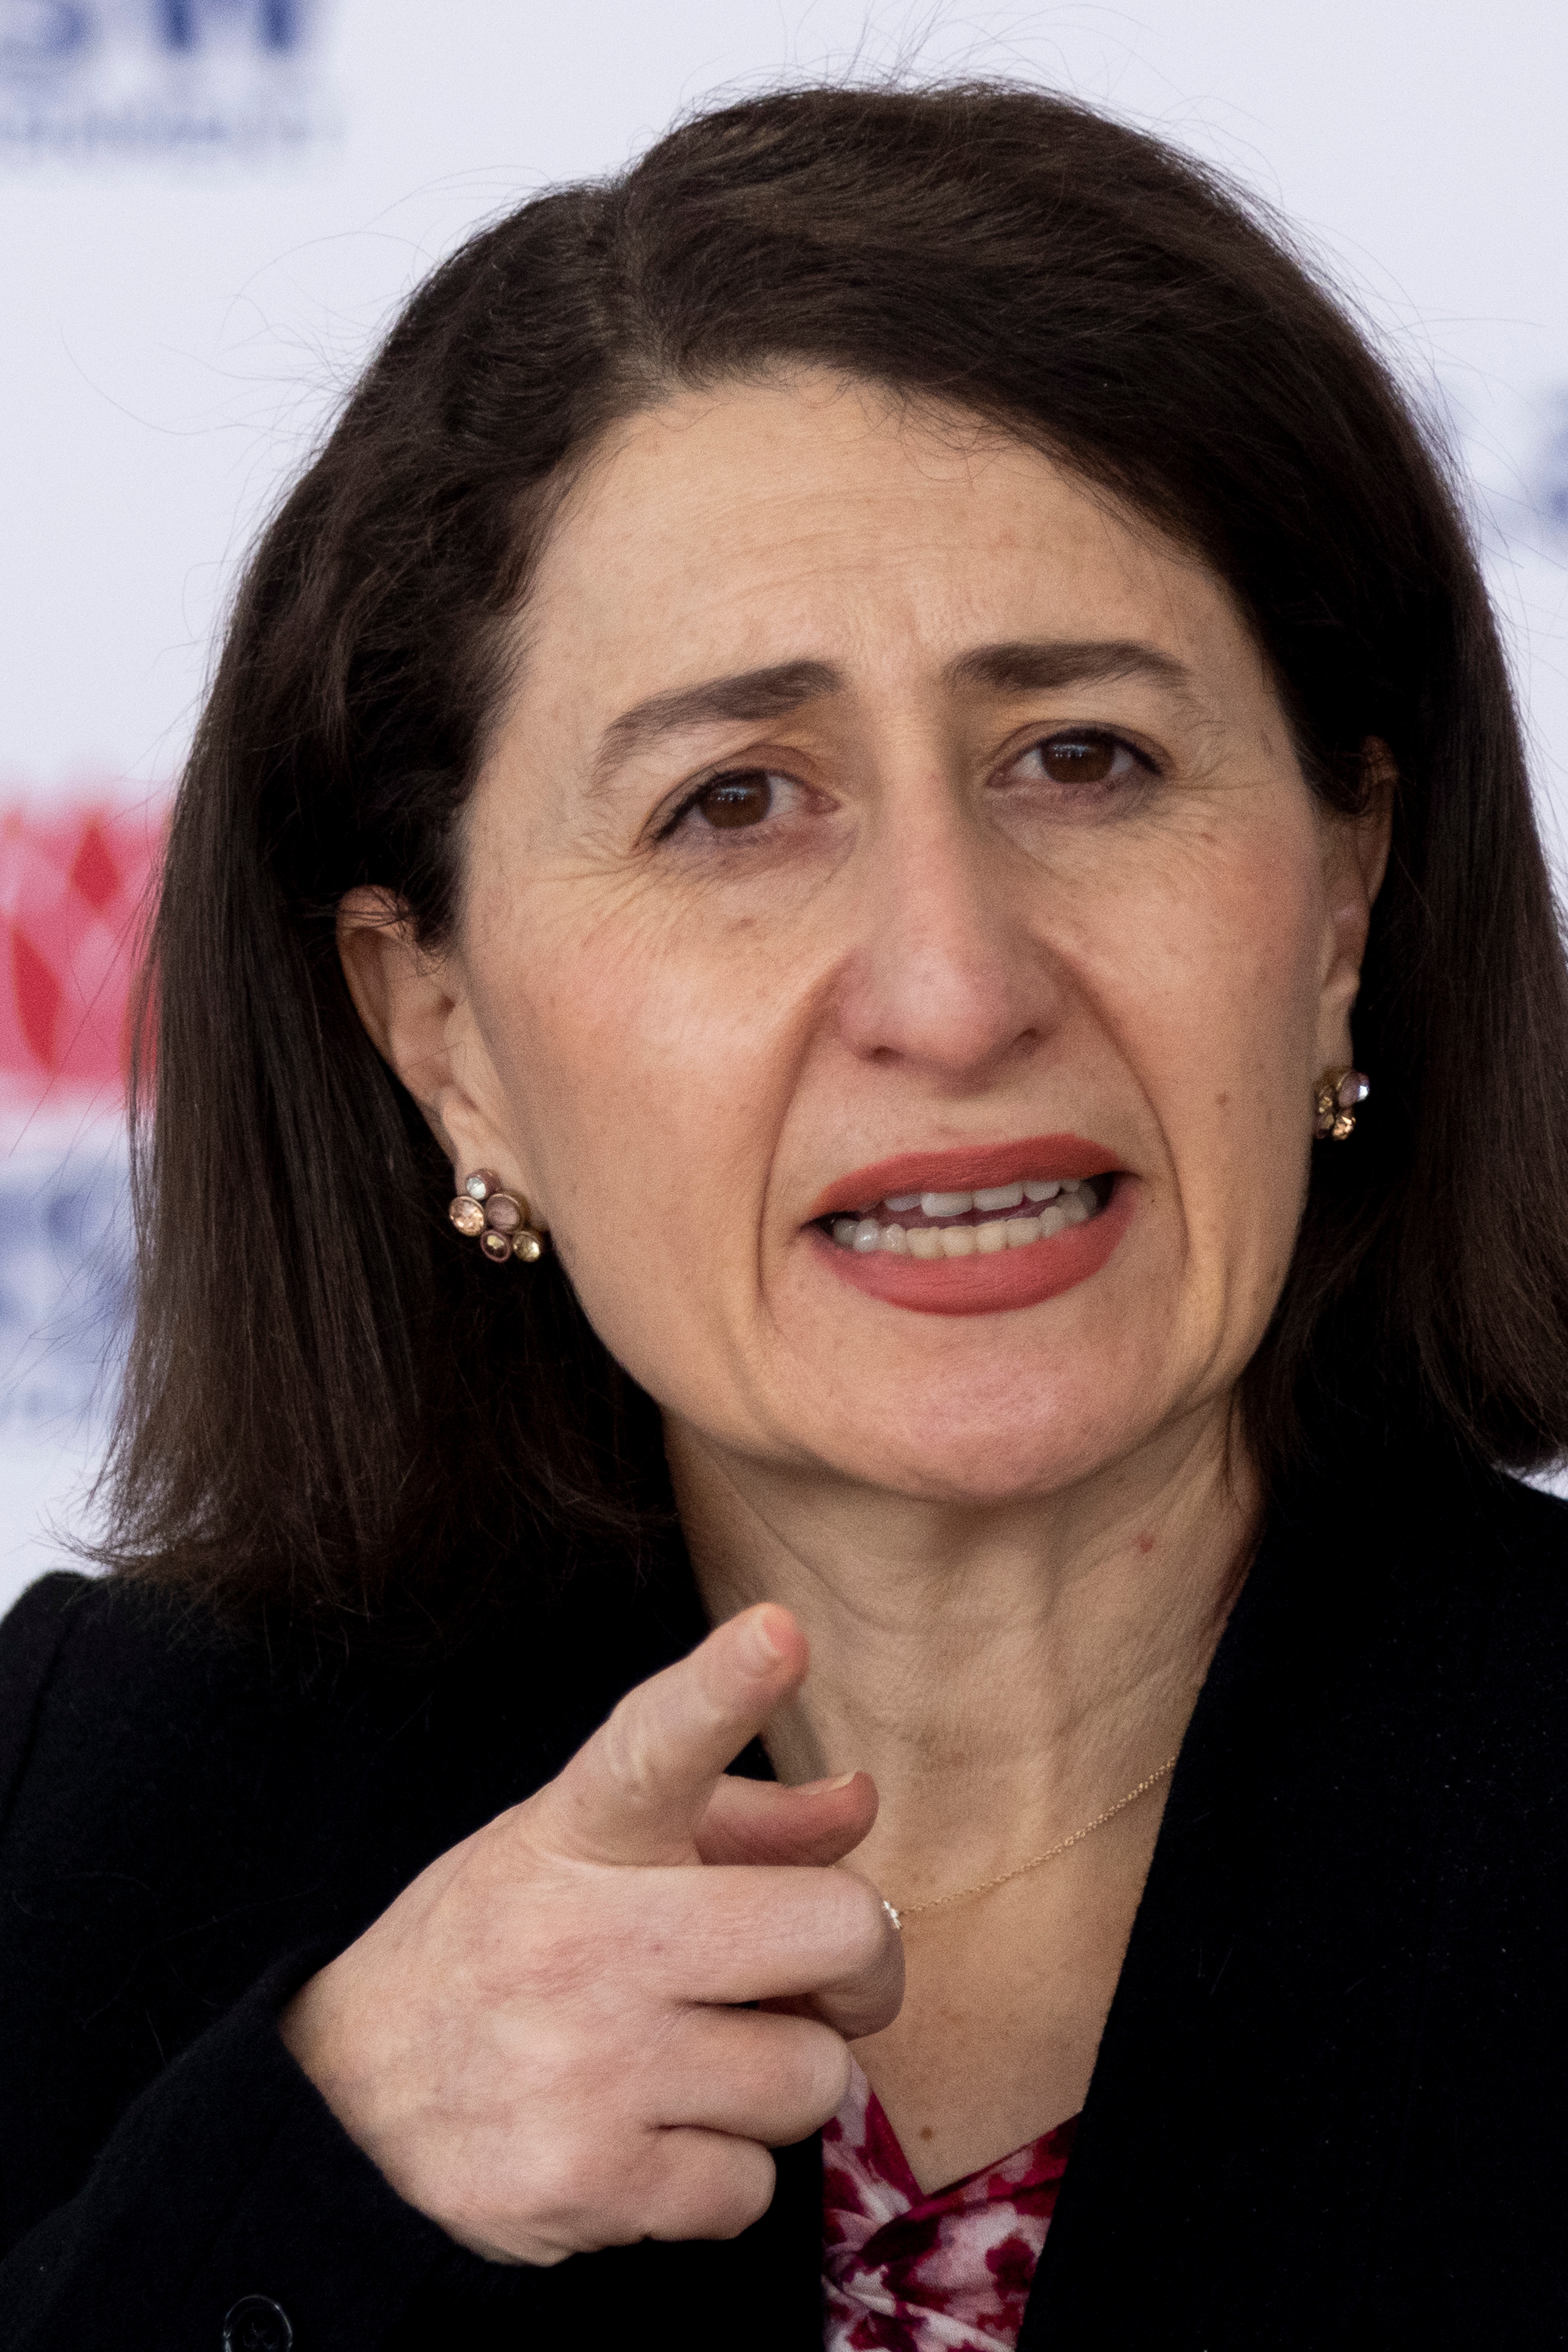 NSW Premier Gladys Berejiklian speaks to the media during a COVID-19 update and press conference in Sydney, Thursday, August 5, 2021. (AAP Image/Pool, Brook Mitchell) NO ARCHIVING